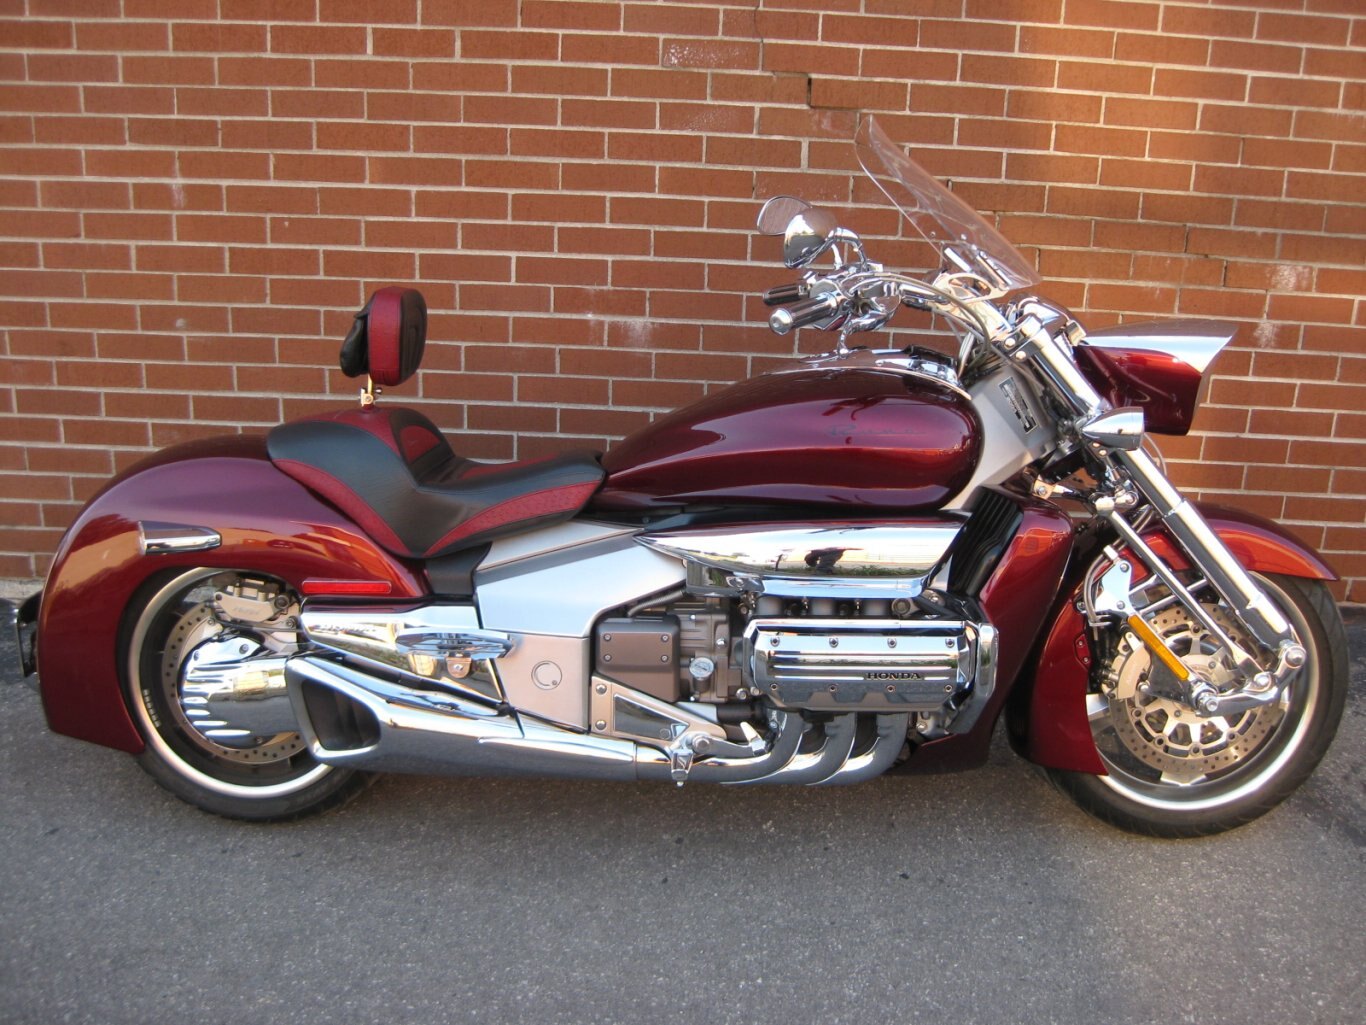 2004 NRX1800 RUNE - SOLD AND CONGRATULATIONS TO SIR “RAZ” “THE ROAD WARRIOR” !! WELCOME TO THE COMMUNITY OF MOTORCYCLING ON THIS HONDA NRX1800 VALKYRIE RUNE – RIDIN THE HIGHWAY TO THE FREEDOM ZONE - WITH THANKS FROM GARY & TEAM CYCLE WORLD!!!!